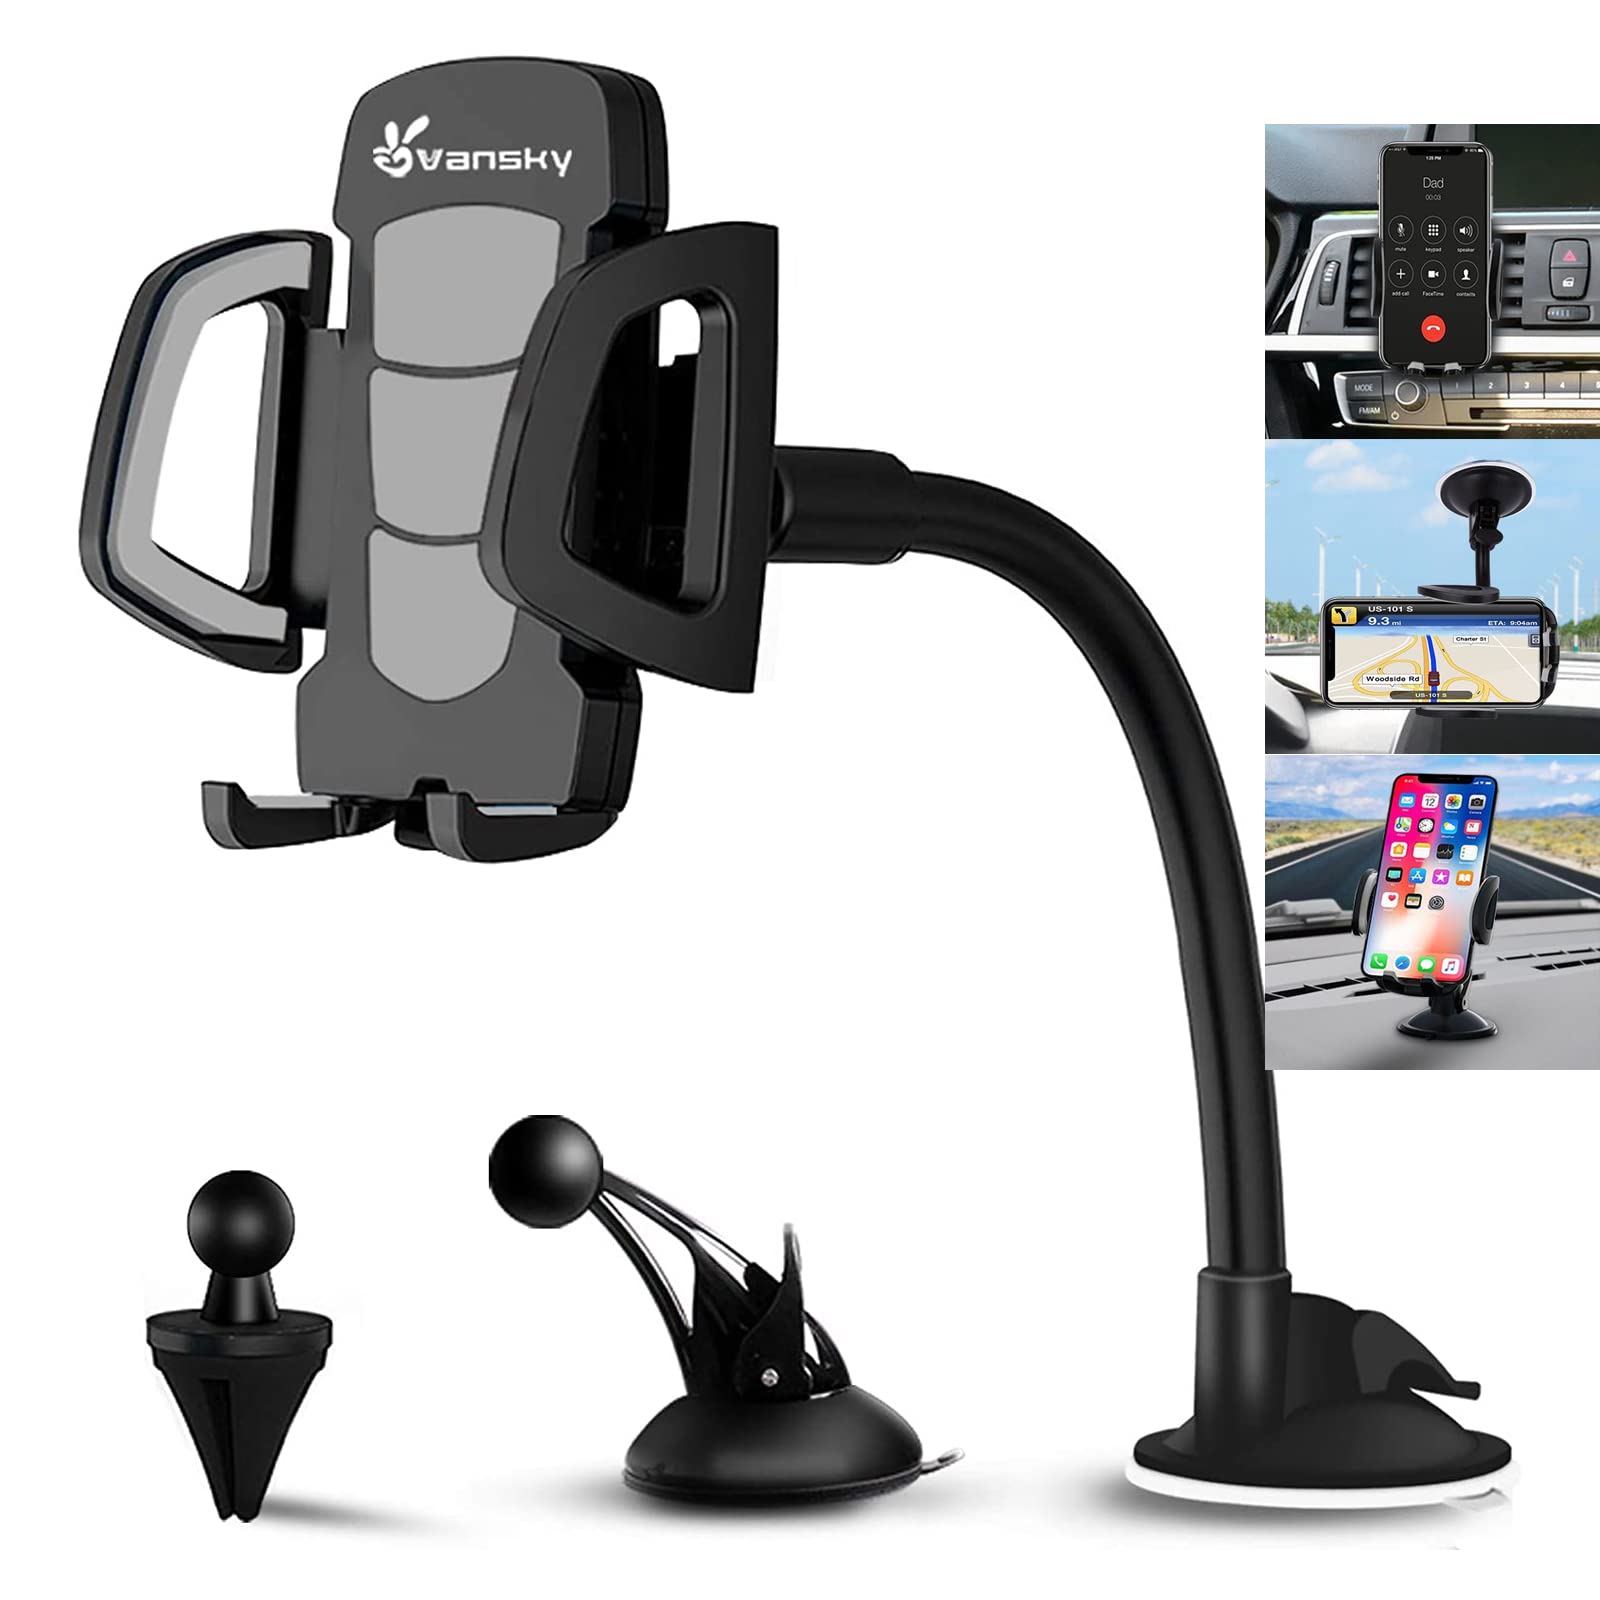 Car Phone Mount, Vansky 3-in-1 Cell Phone Holder Car Air Vent Holder Dashboard Mount Windshield Mount for iPhone Xs Max R X 8 Plus 7 Plus 6S Samsung Galaxy S9 S8 Edge S7 S6 LG Sony and More